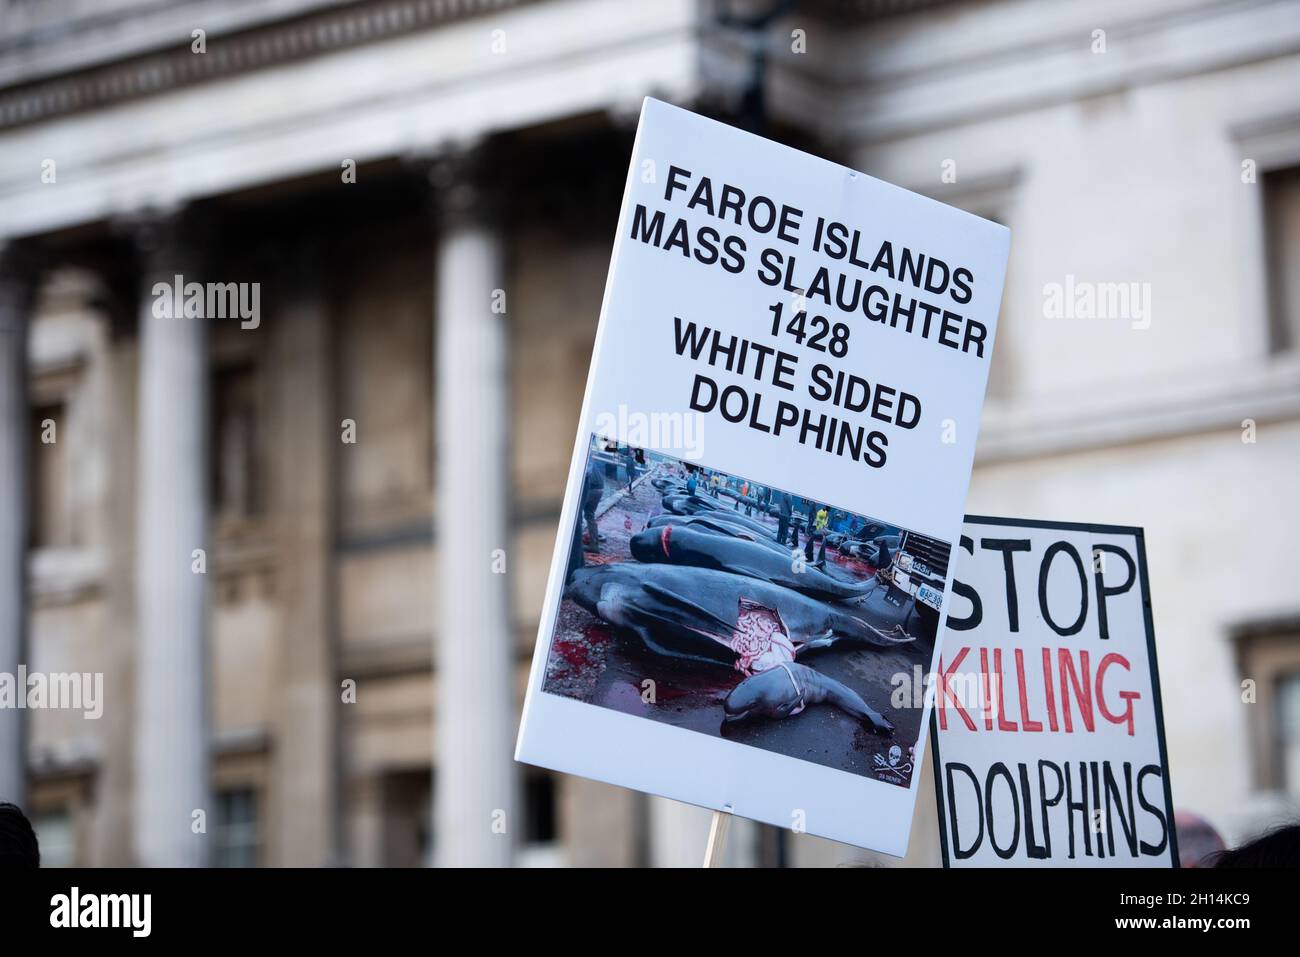 London, UK. 16th Oct, 2021. London, UK. 16th Oct, 2021. Activists hold signs during the Stop the Whale and Dolphin Slaughter Protest.Born Free's Policy Advisor Dominic Dyer calls for sanctions NOW to end the shameful Faroe Islands slaughter of whales and dolphins. The brutal slaughter of more than 1,400 white-sided dolphins in the Faroe Islands has triggered huge anger and revulsion around the world, and once again brought global attention to the long and bloody history of whale and dolphin-killing in this beautiful but isolated archipelago 200 miles north-west of Scotland. Credit: SOPA Images Stock Photo